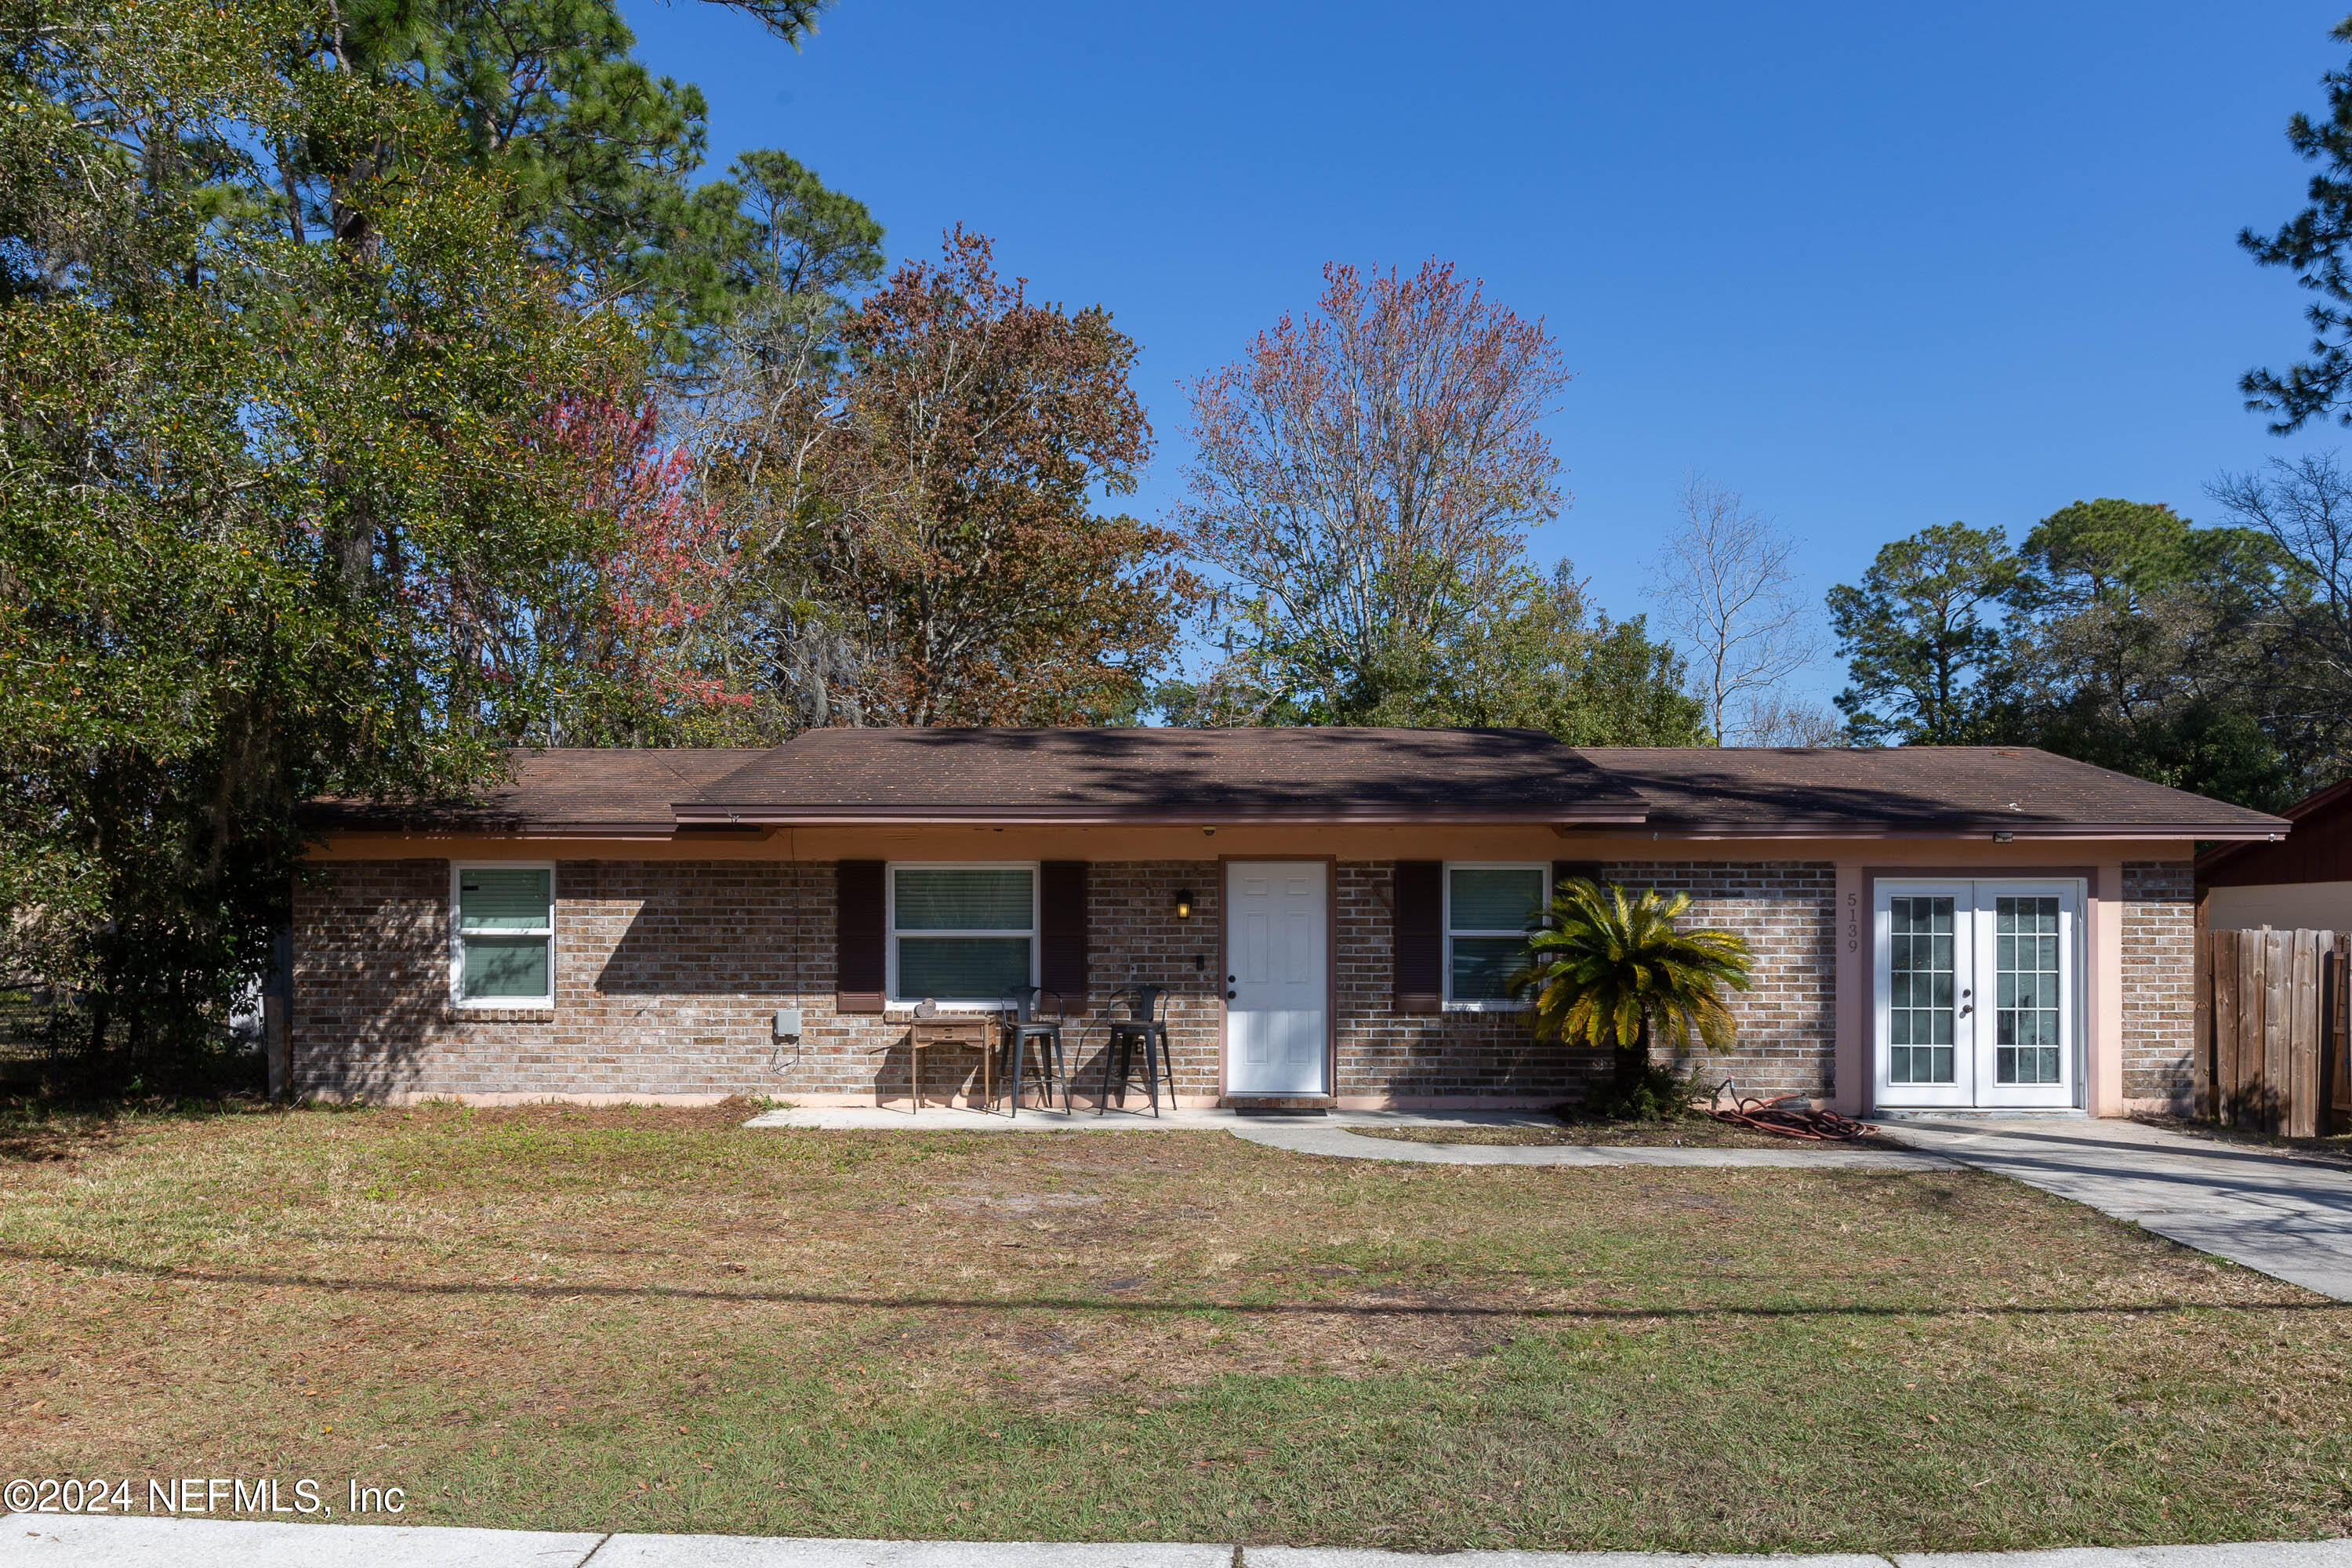 Jacksonville, FL home for sale located at 5139 110th Street, Jacksonville, FL 32244